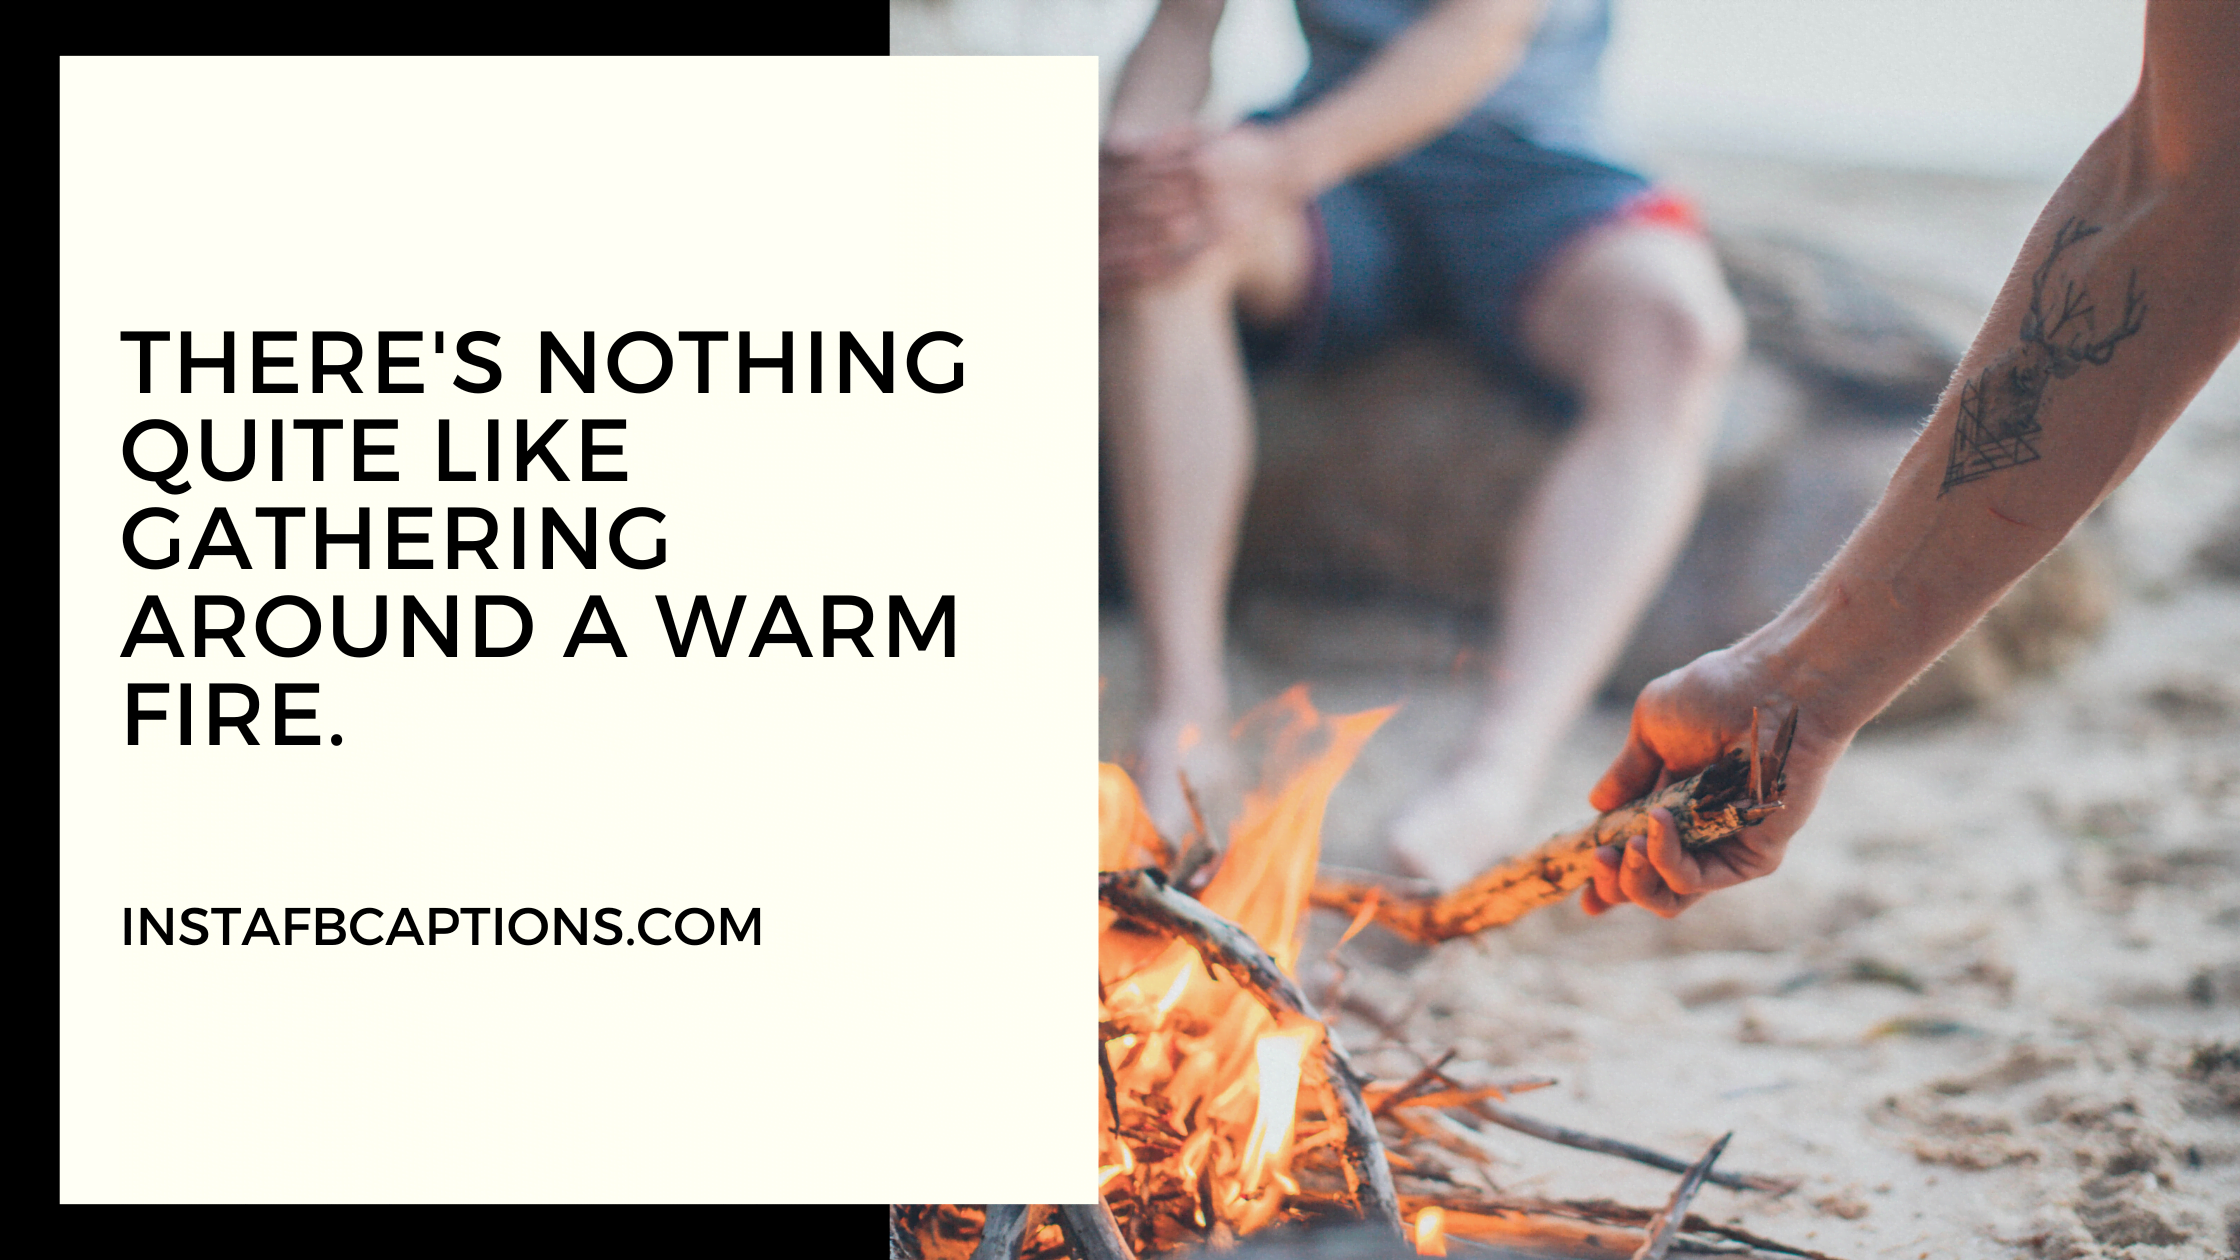 There's nothing quite like gathering around a warm fire. fire instagram captions - Reddit Fire Instagram Captions - 95 Fire Captions &amp; Quotes For Instagram Posts in 2022